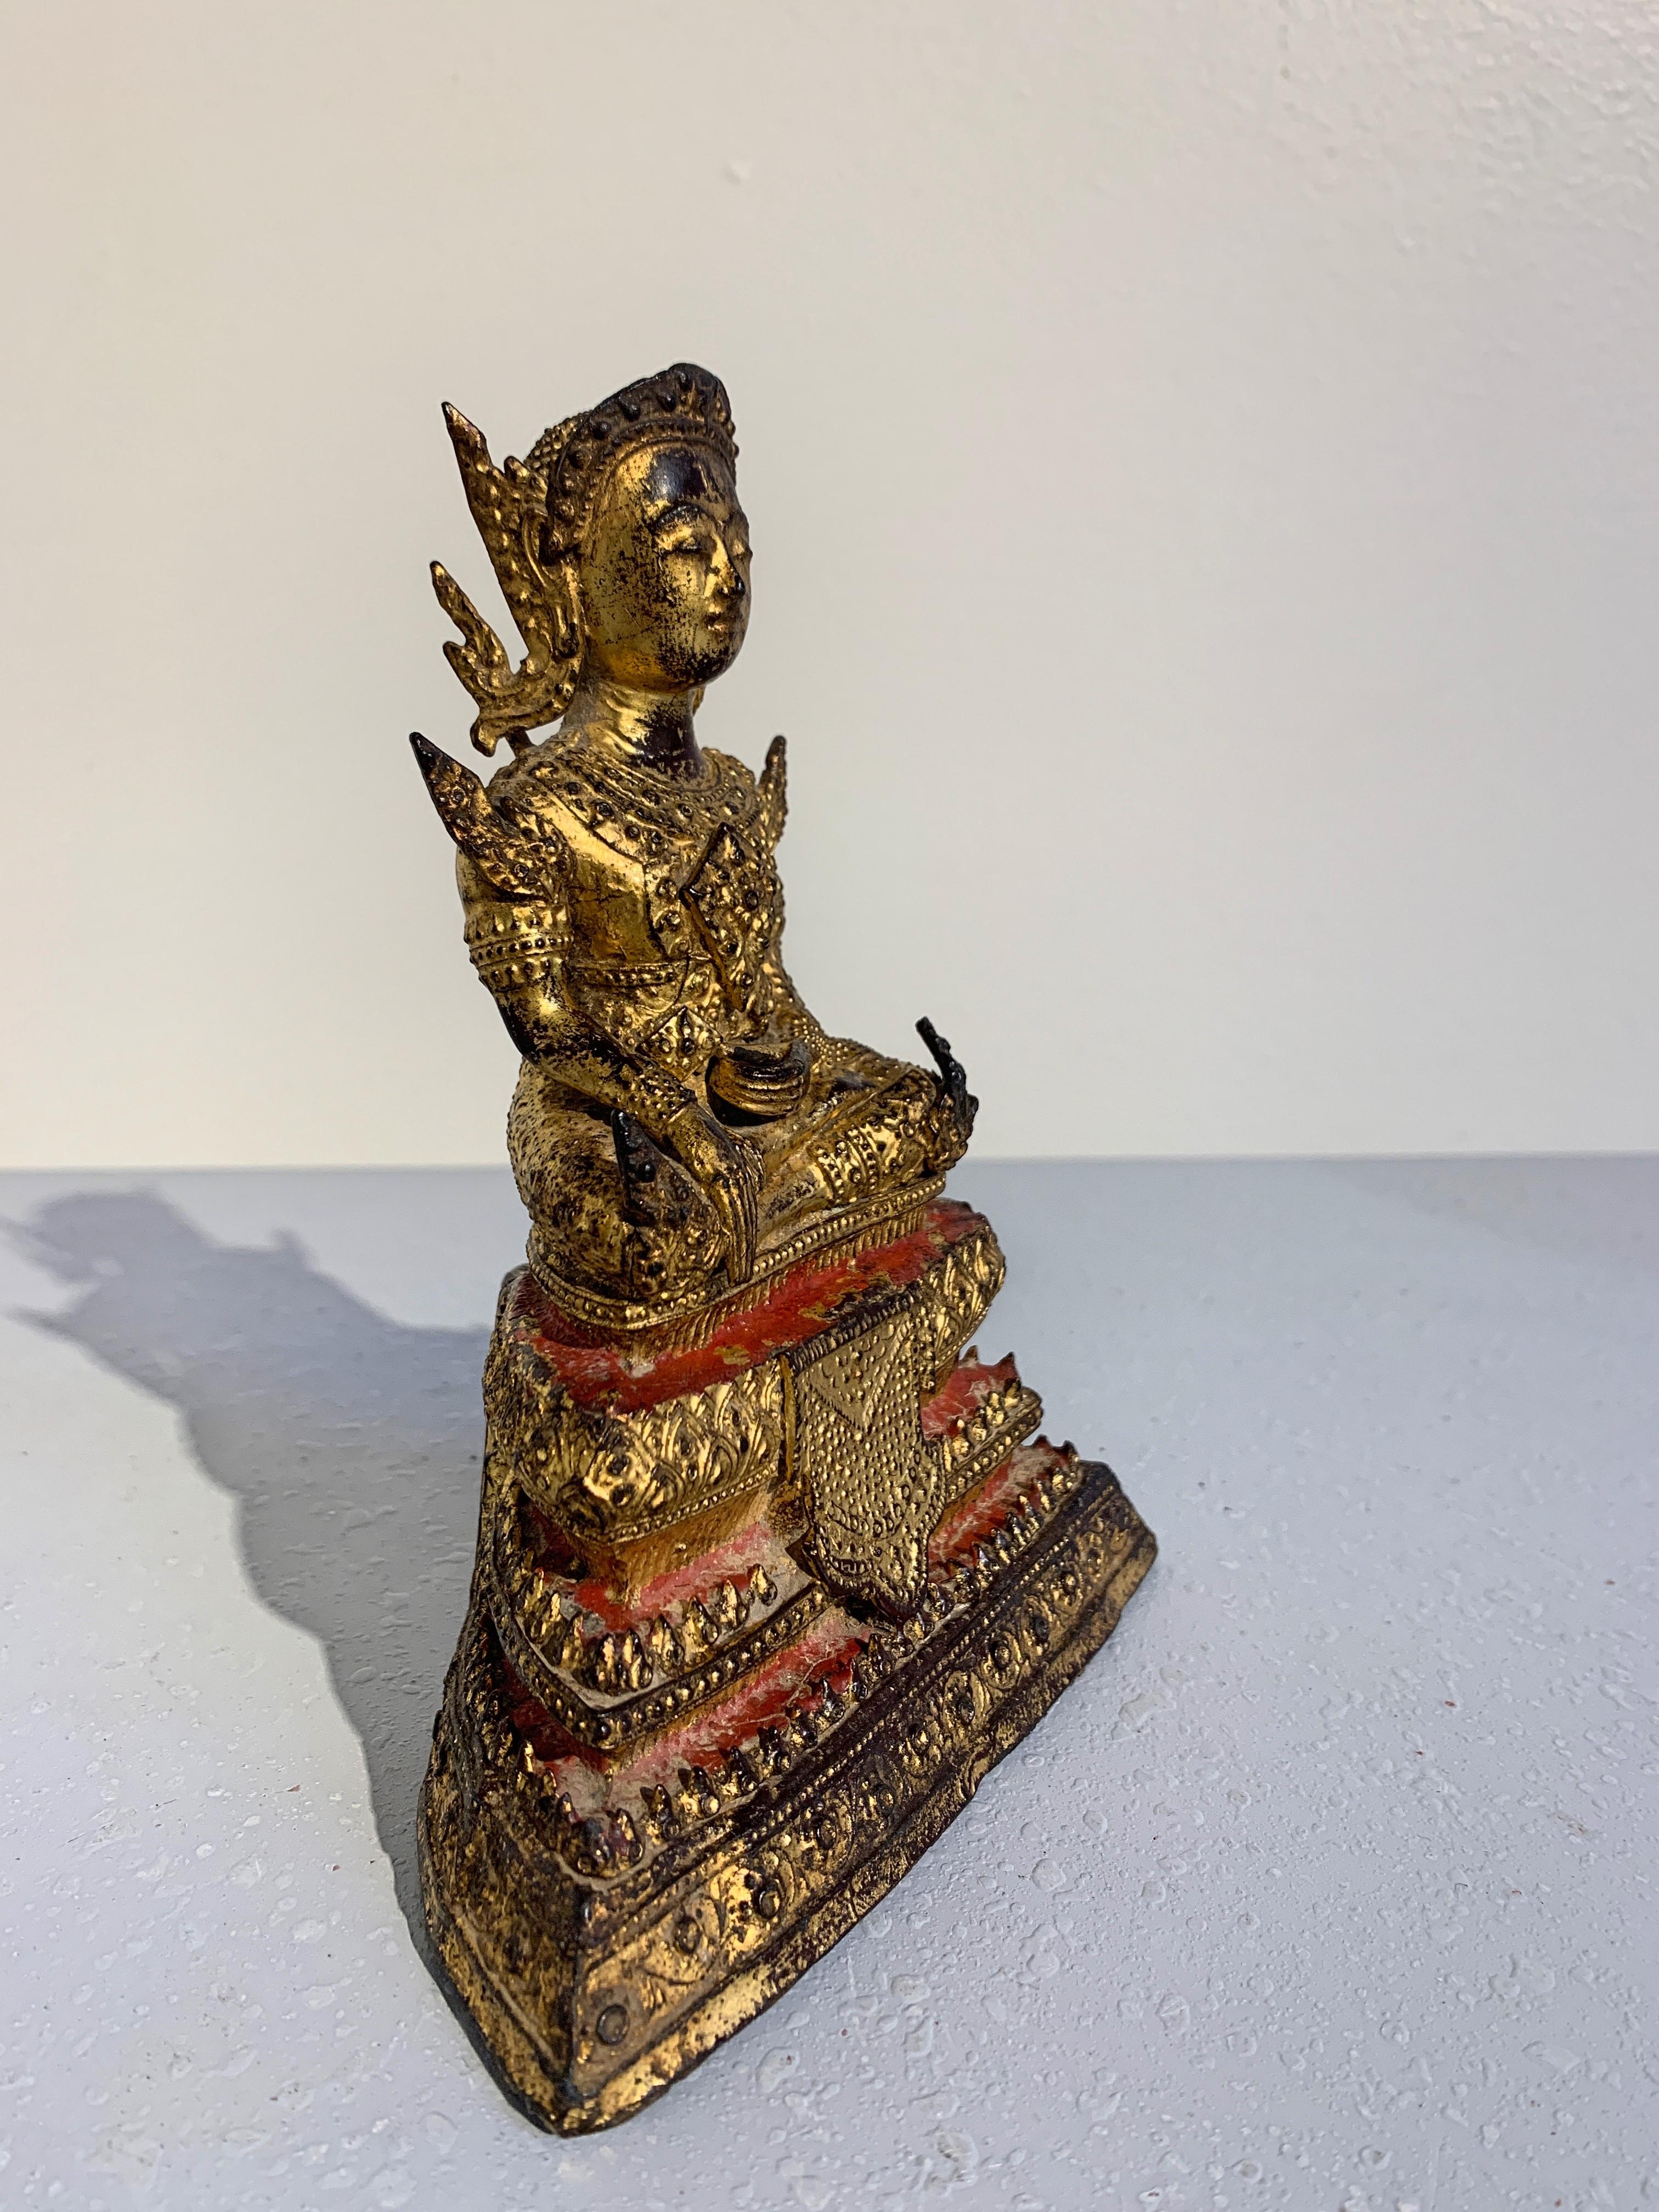 A small and very finely cast, lacquered and gilt bronze Thai Buddha dressed in royal attire, Rattanakosin Period (Rama III), Thailand, mid-19th century. 

Somewhat unusual in its iconography, this figure depicts the Bodhisattva Maitreya, the